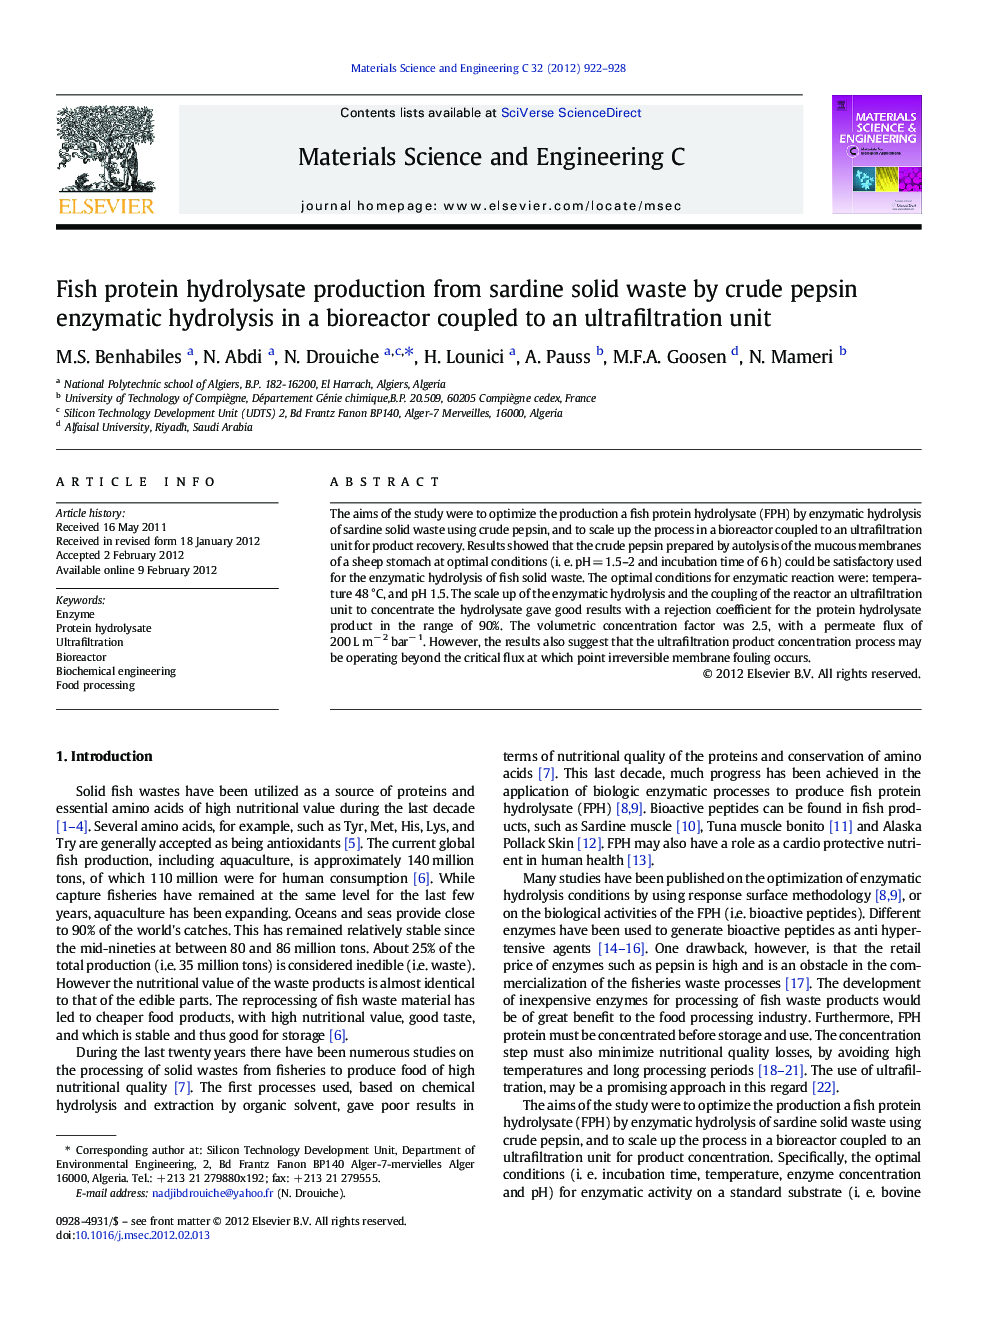 Fish protein hydrolysate production from sardine solid waste by crude pepsin enzymatic hydrolysis in a bioreactor coupled to an ultrafiltration unit